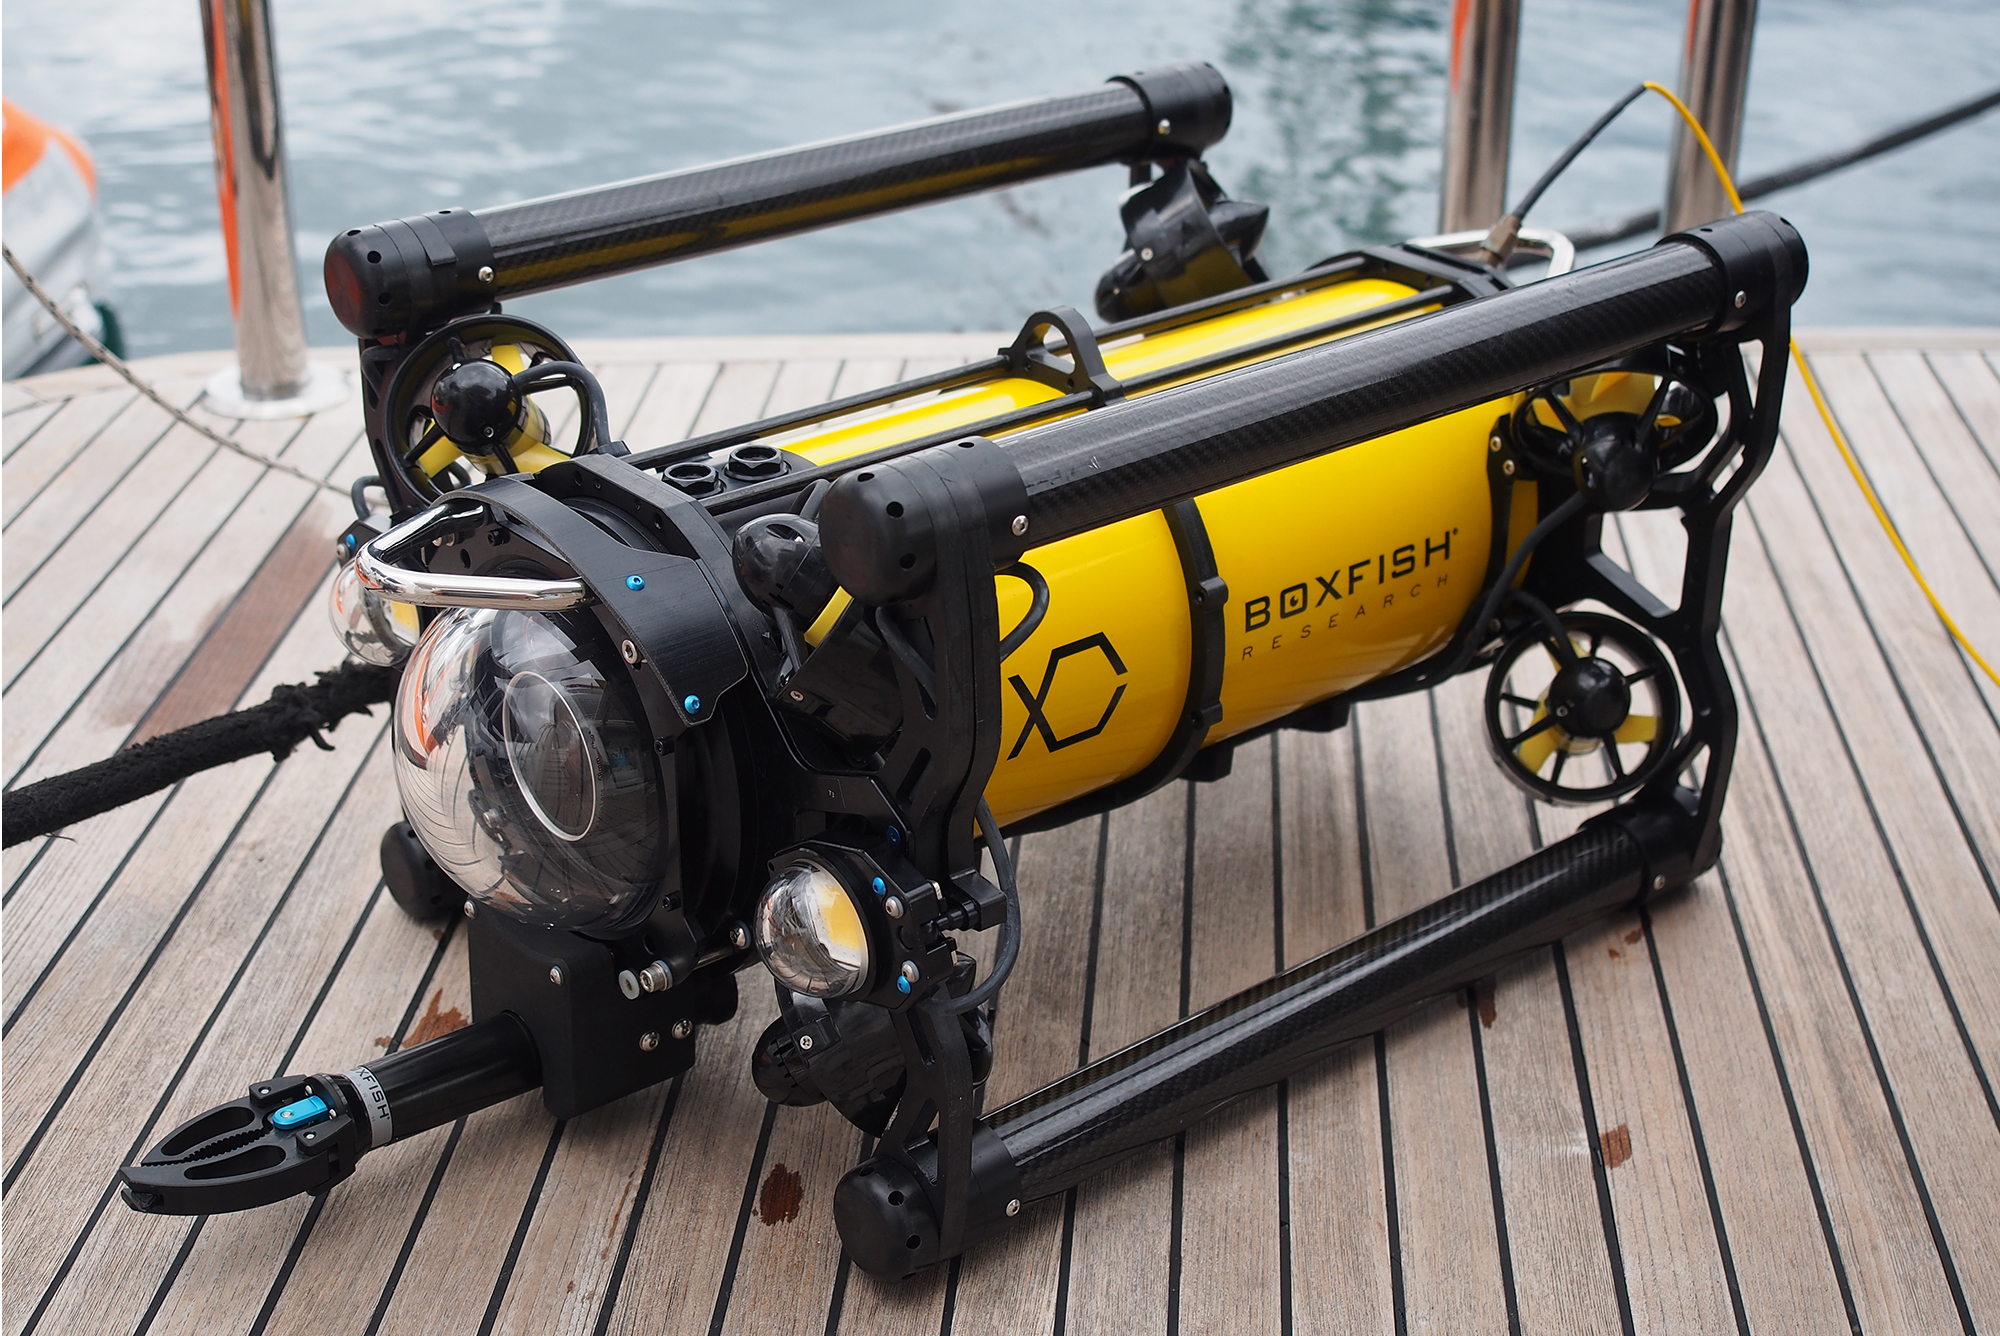 Boxfish ROV pictured on the deck of a marine leisure boat